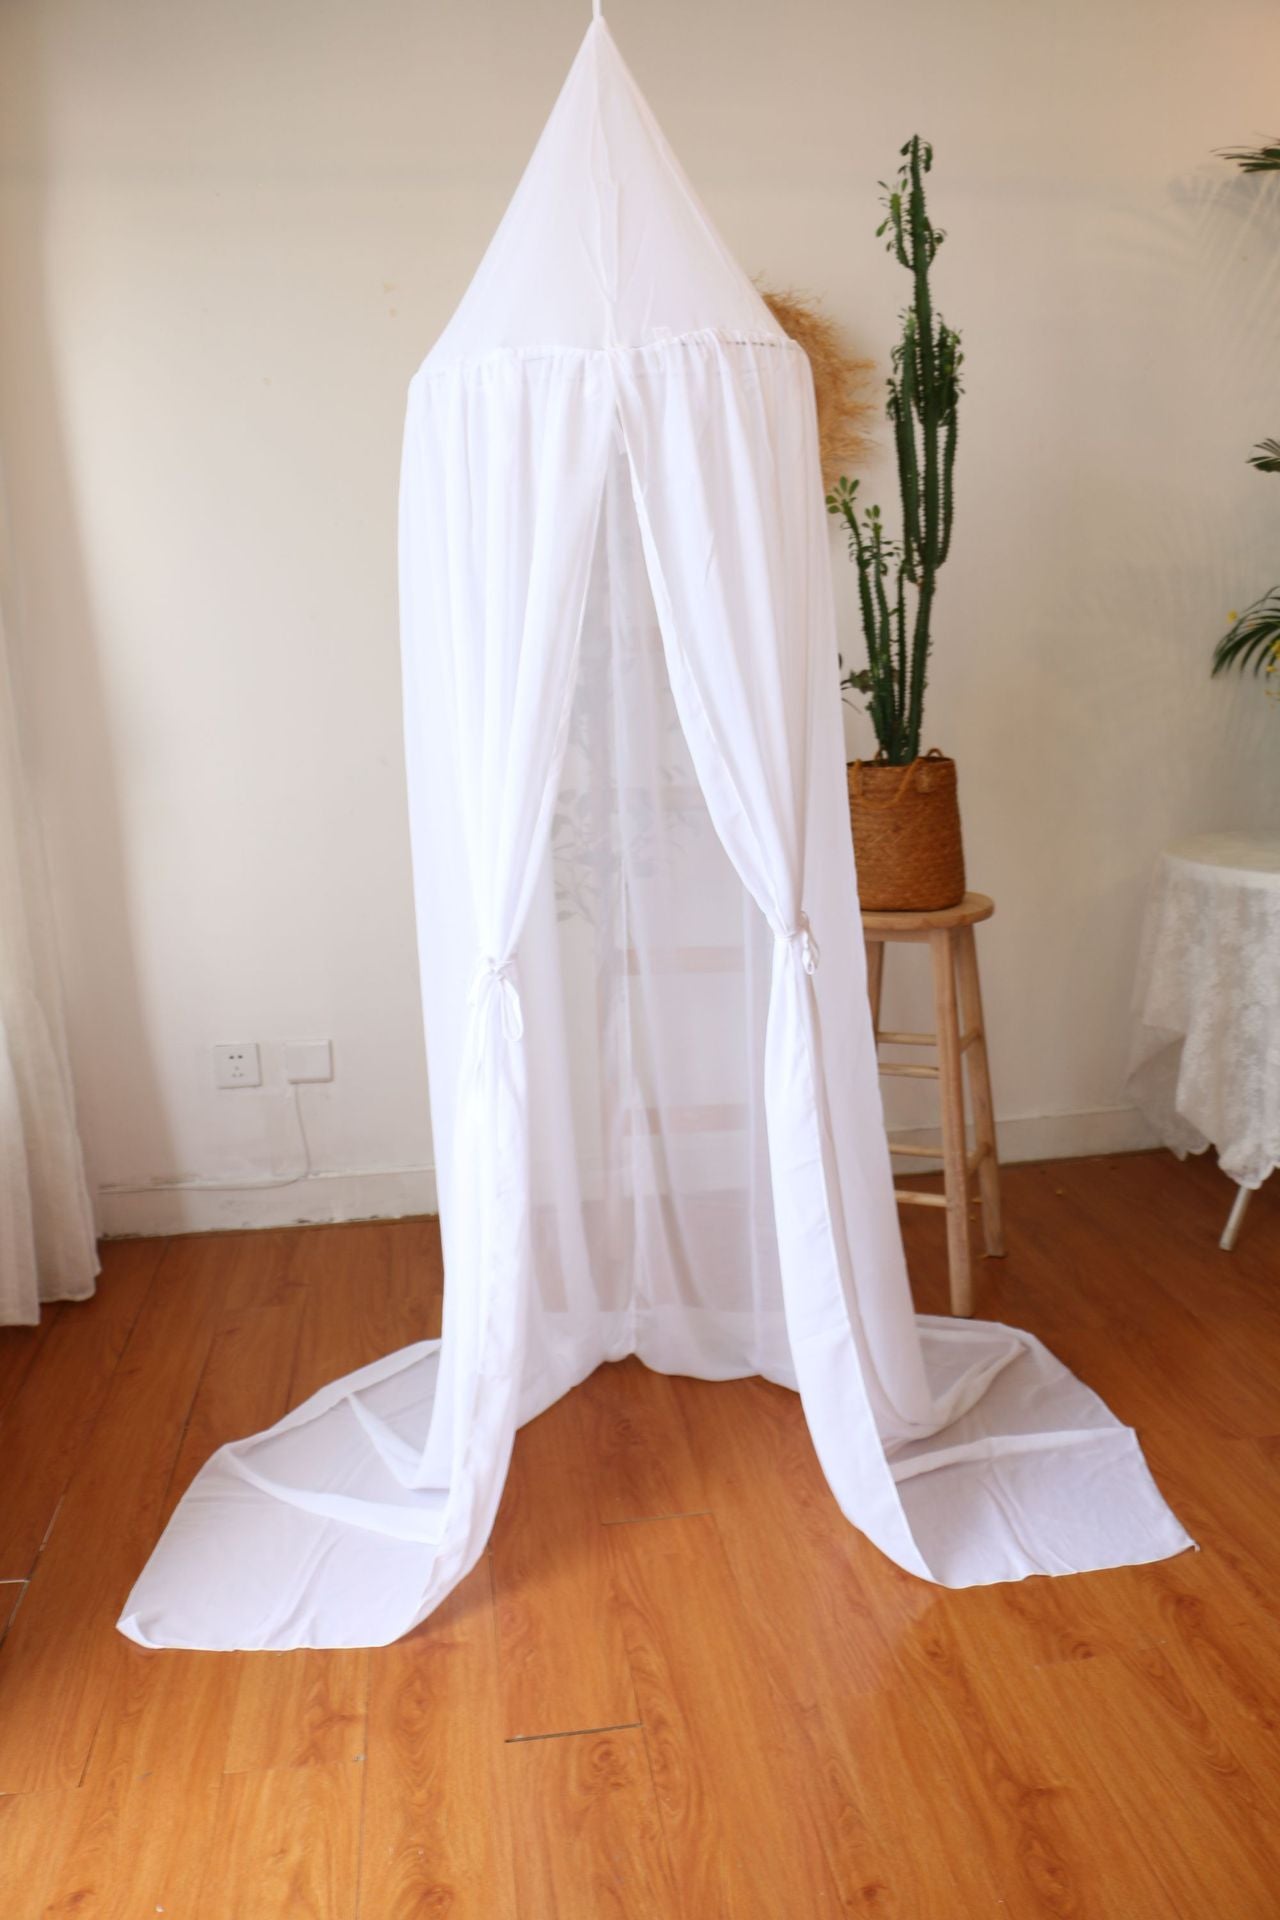 Children's Tent Chiffon Mosquito Net Baby Dome Tent Bed Curtain